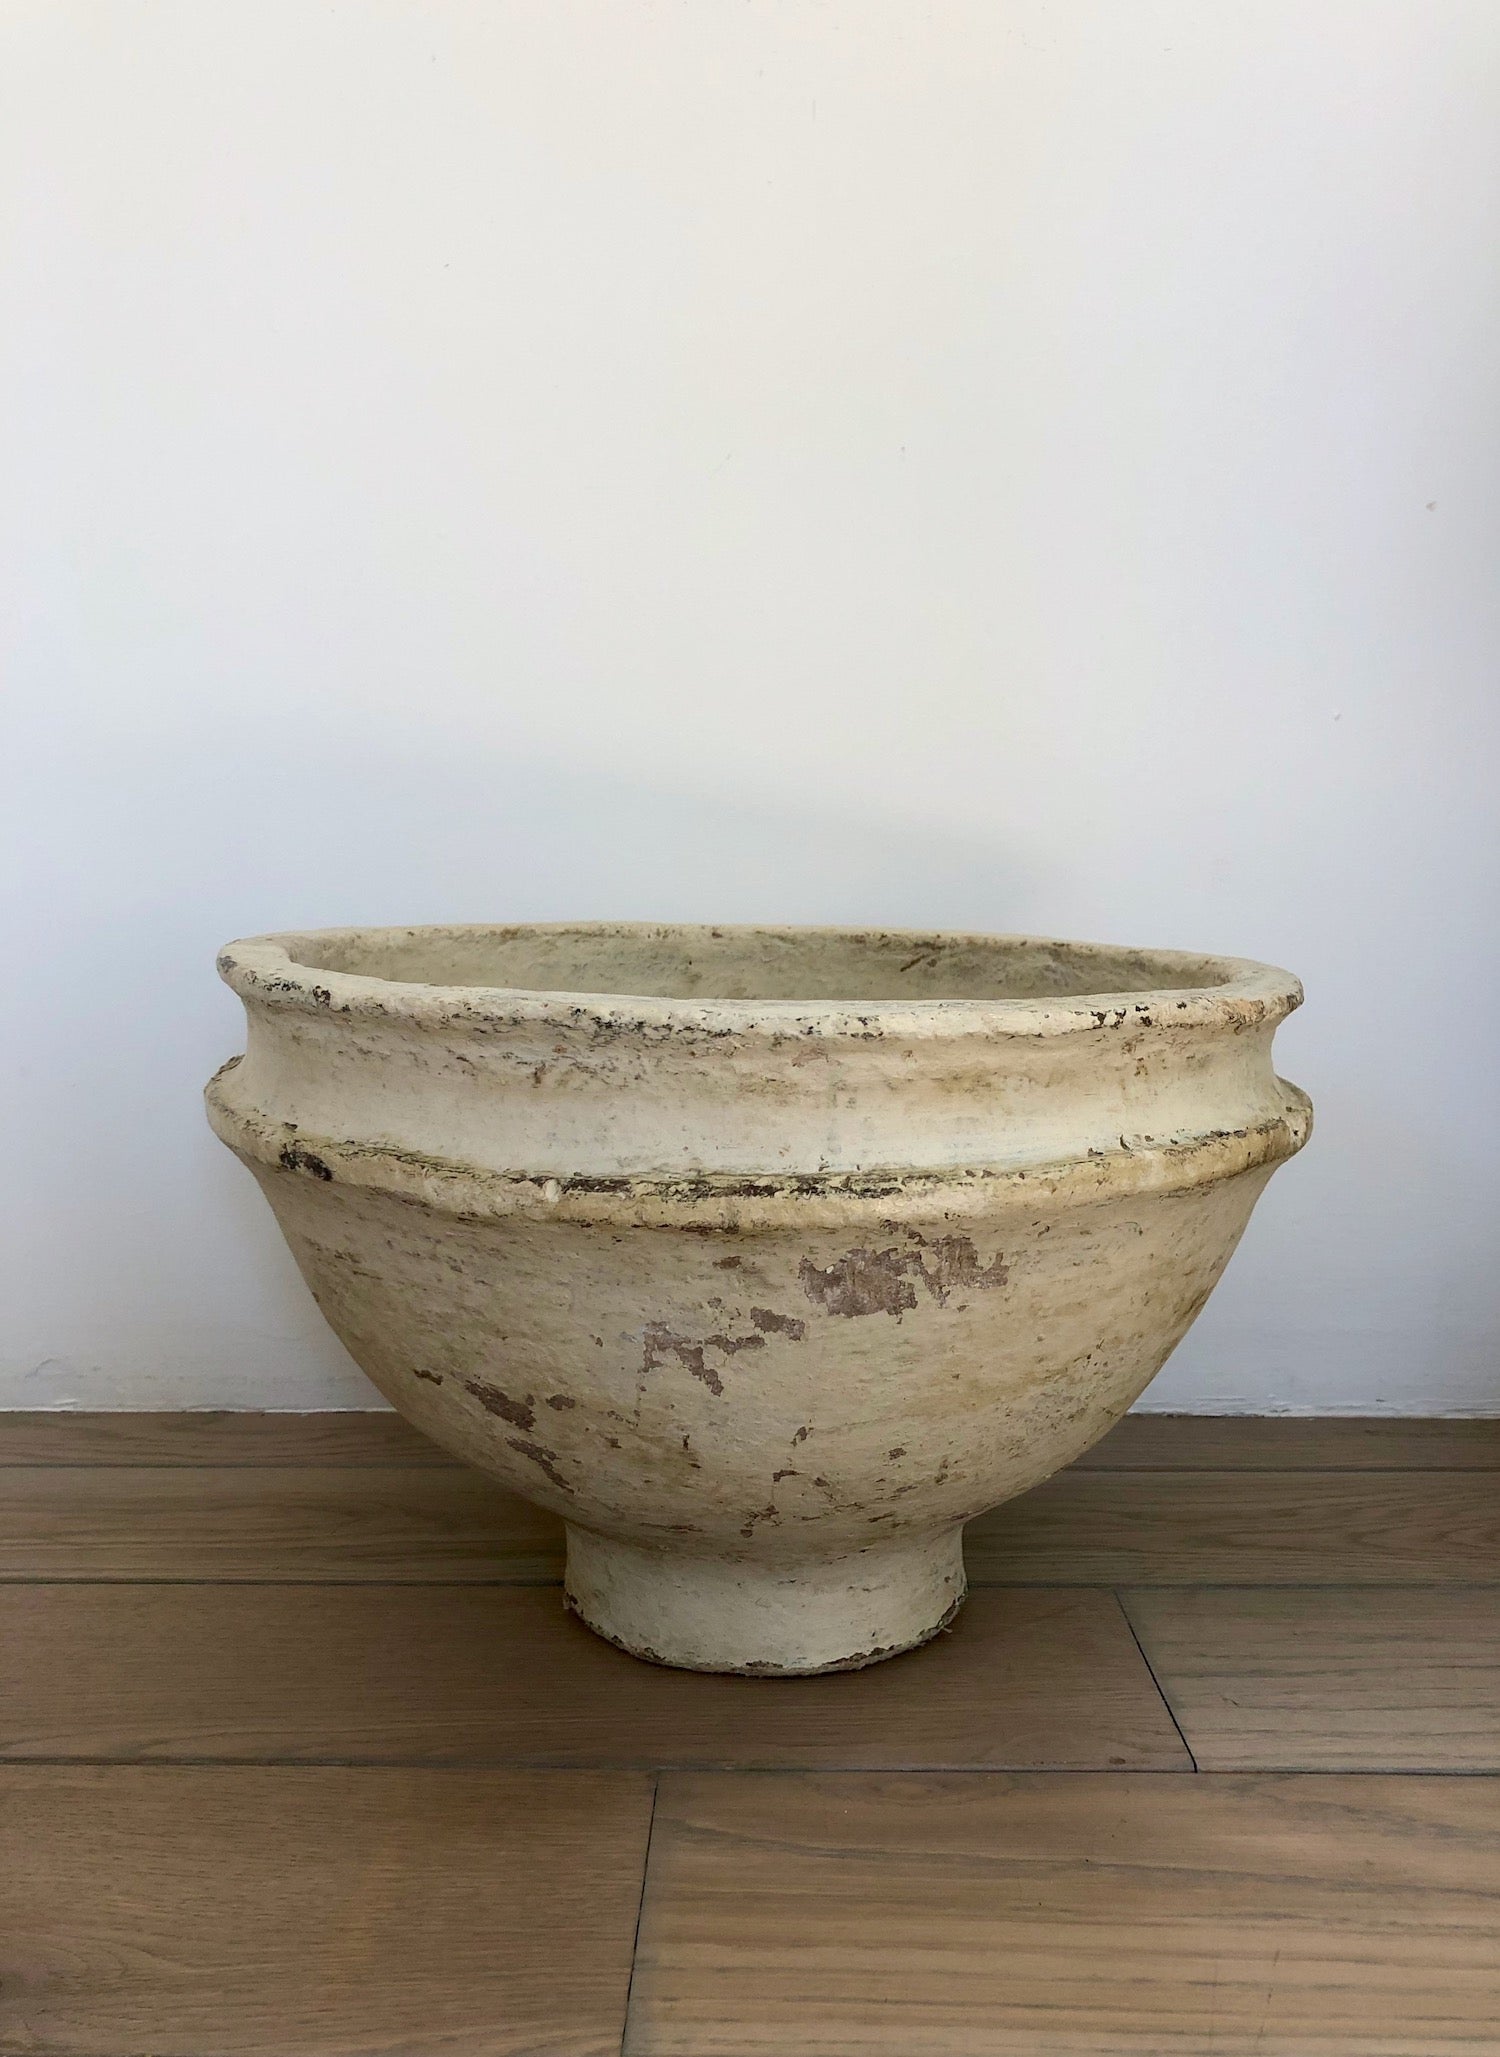 Oversized, hand crafted footed paper maché bowl with distinctive rim in a natural cream color.